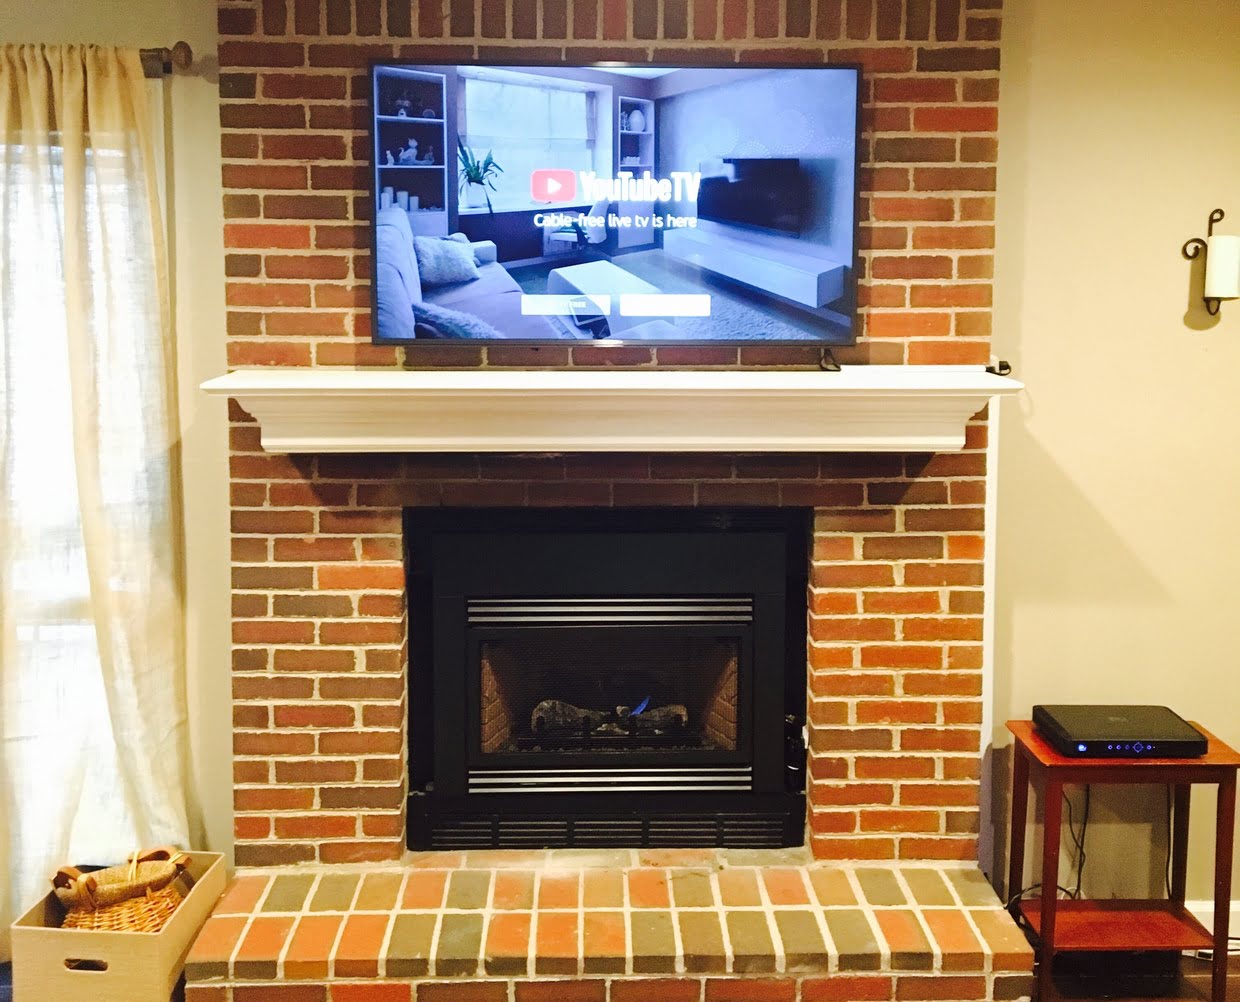 How Do You Mount A TV On A Brick Fireplace